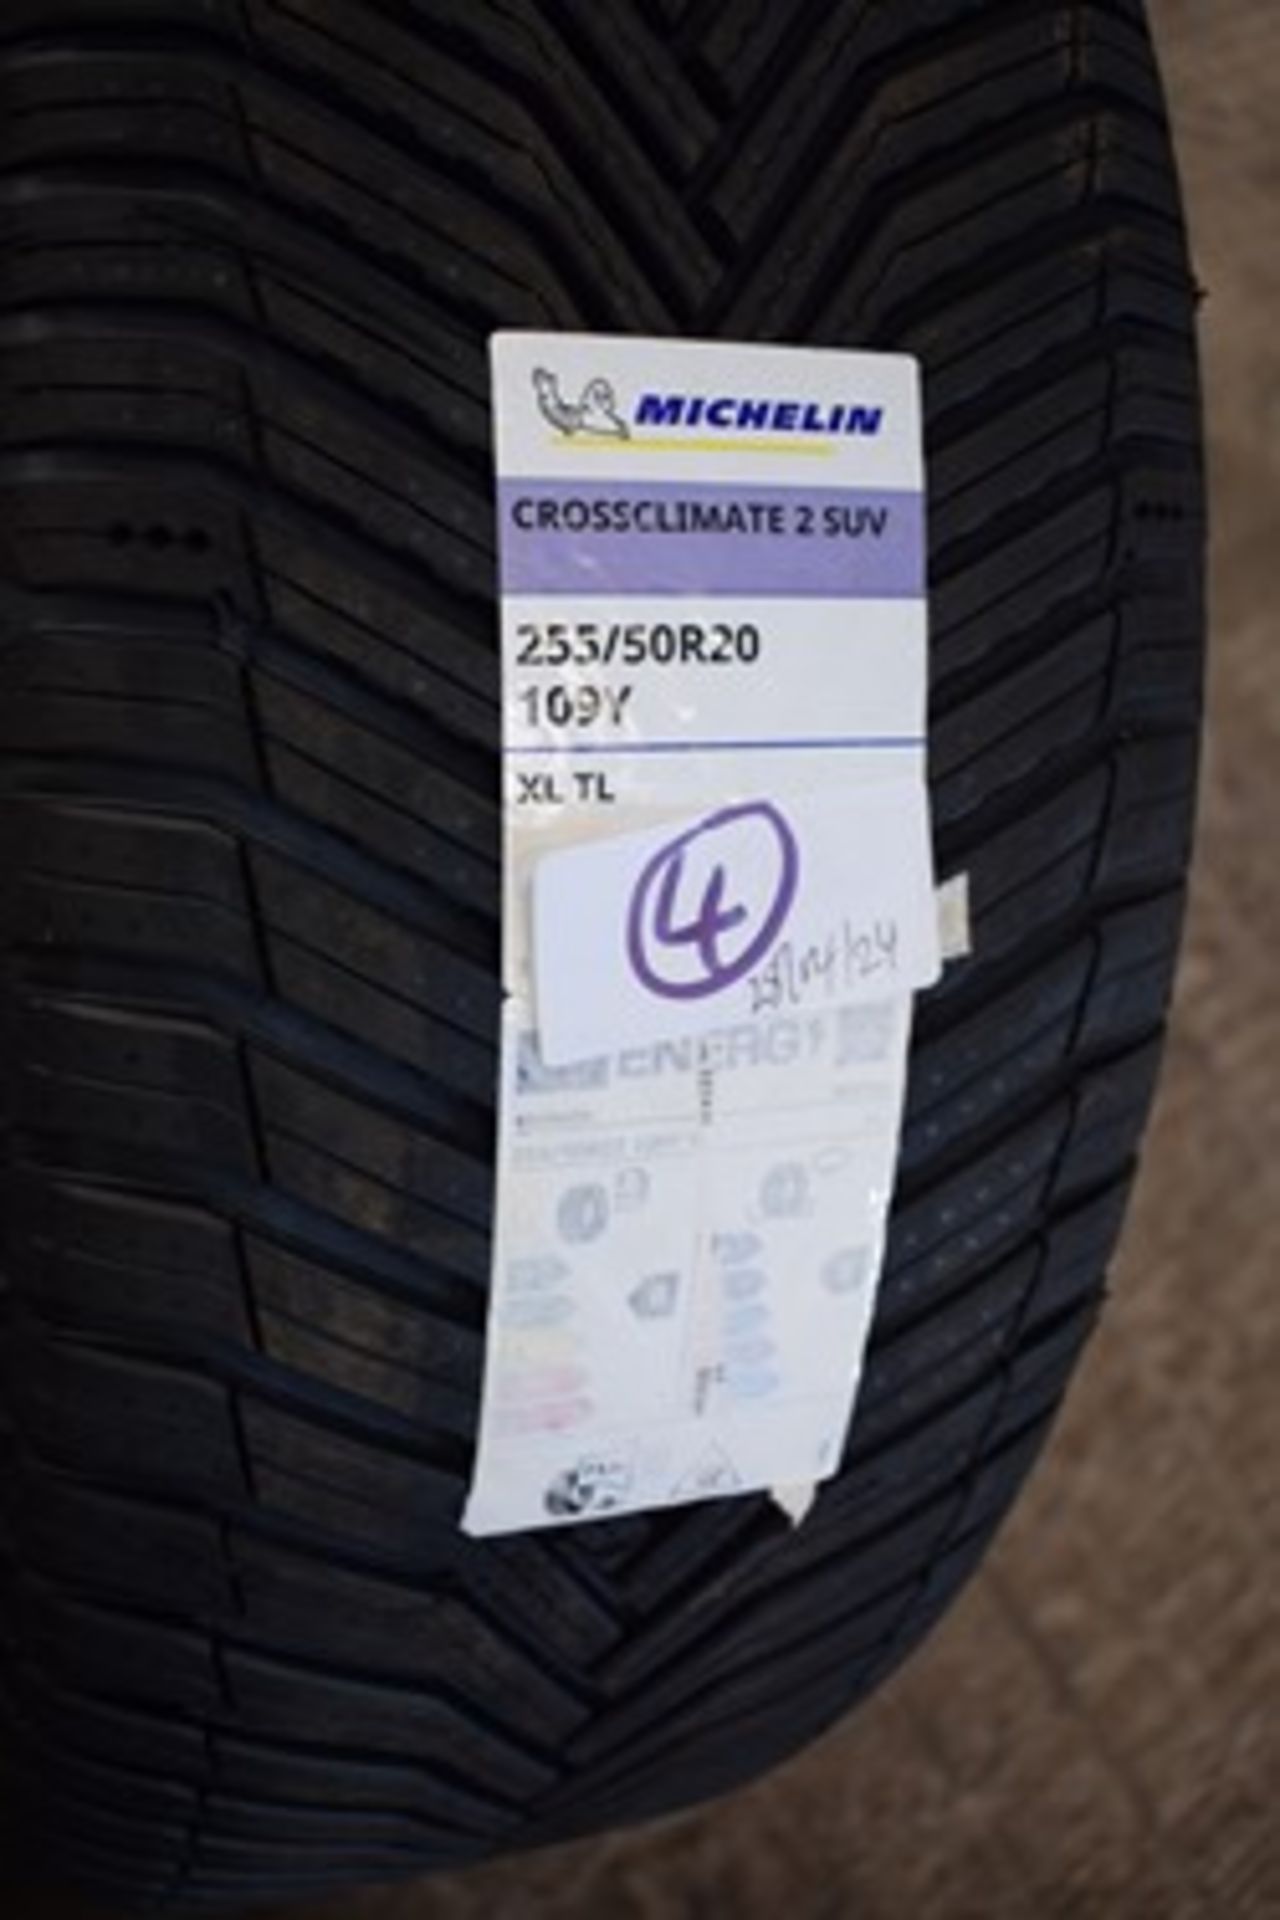 1 x pair of Michelin Cross Climate 2 SUV tyres, size 255/50R20 109Y XLTL - new with labels (cage